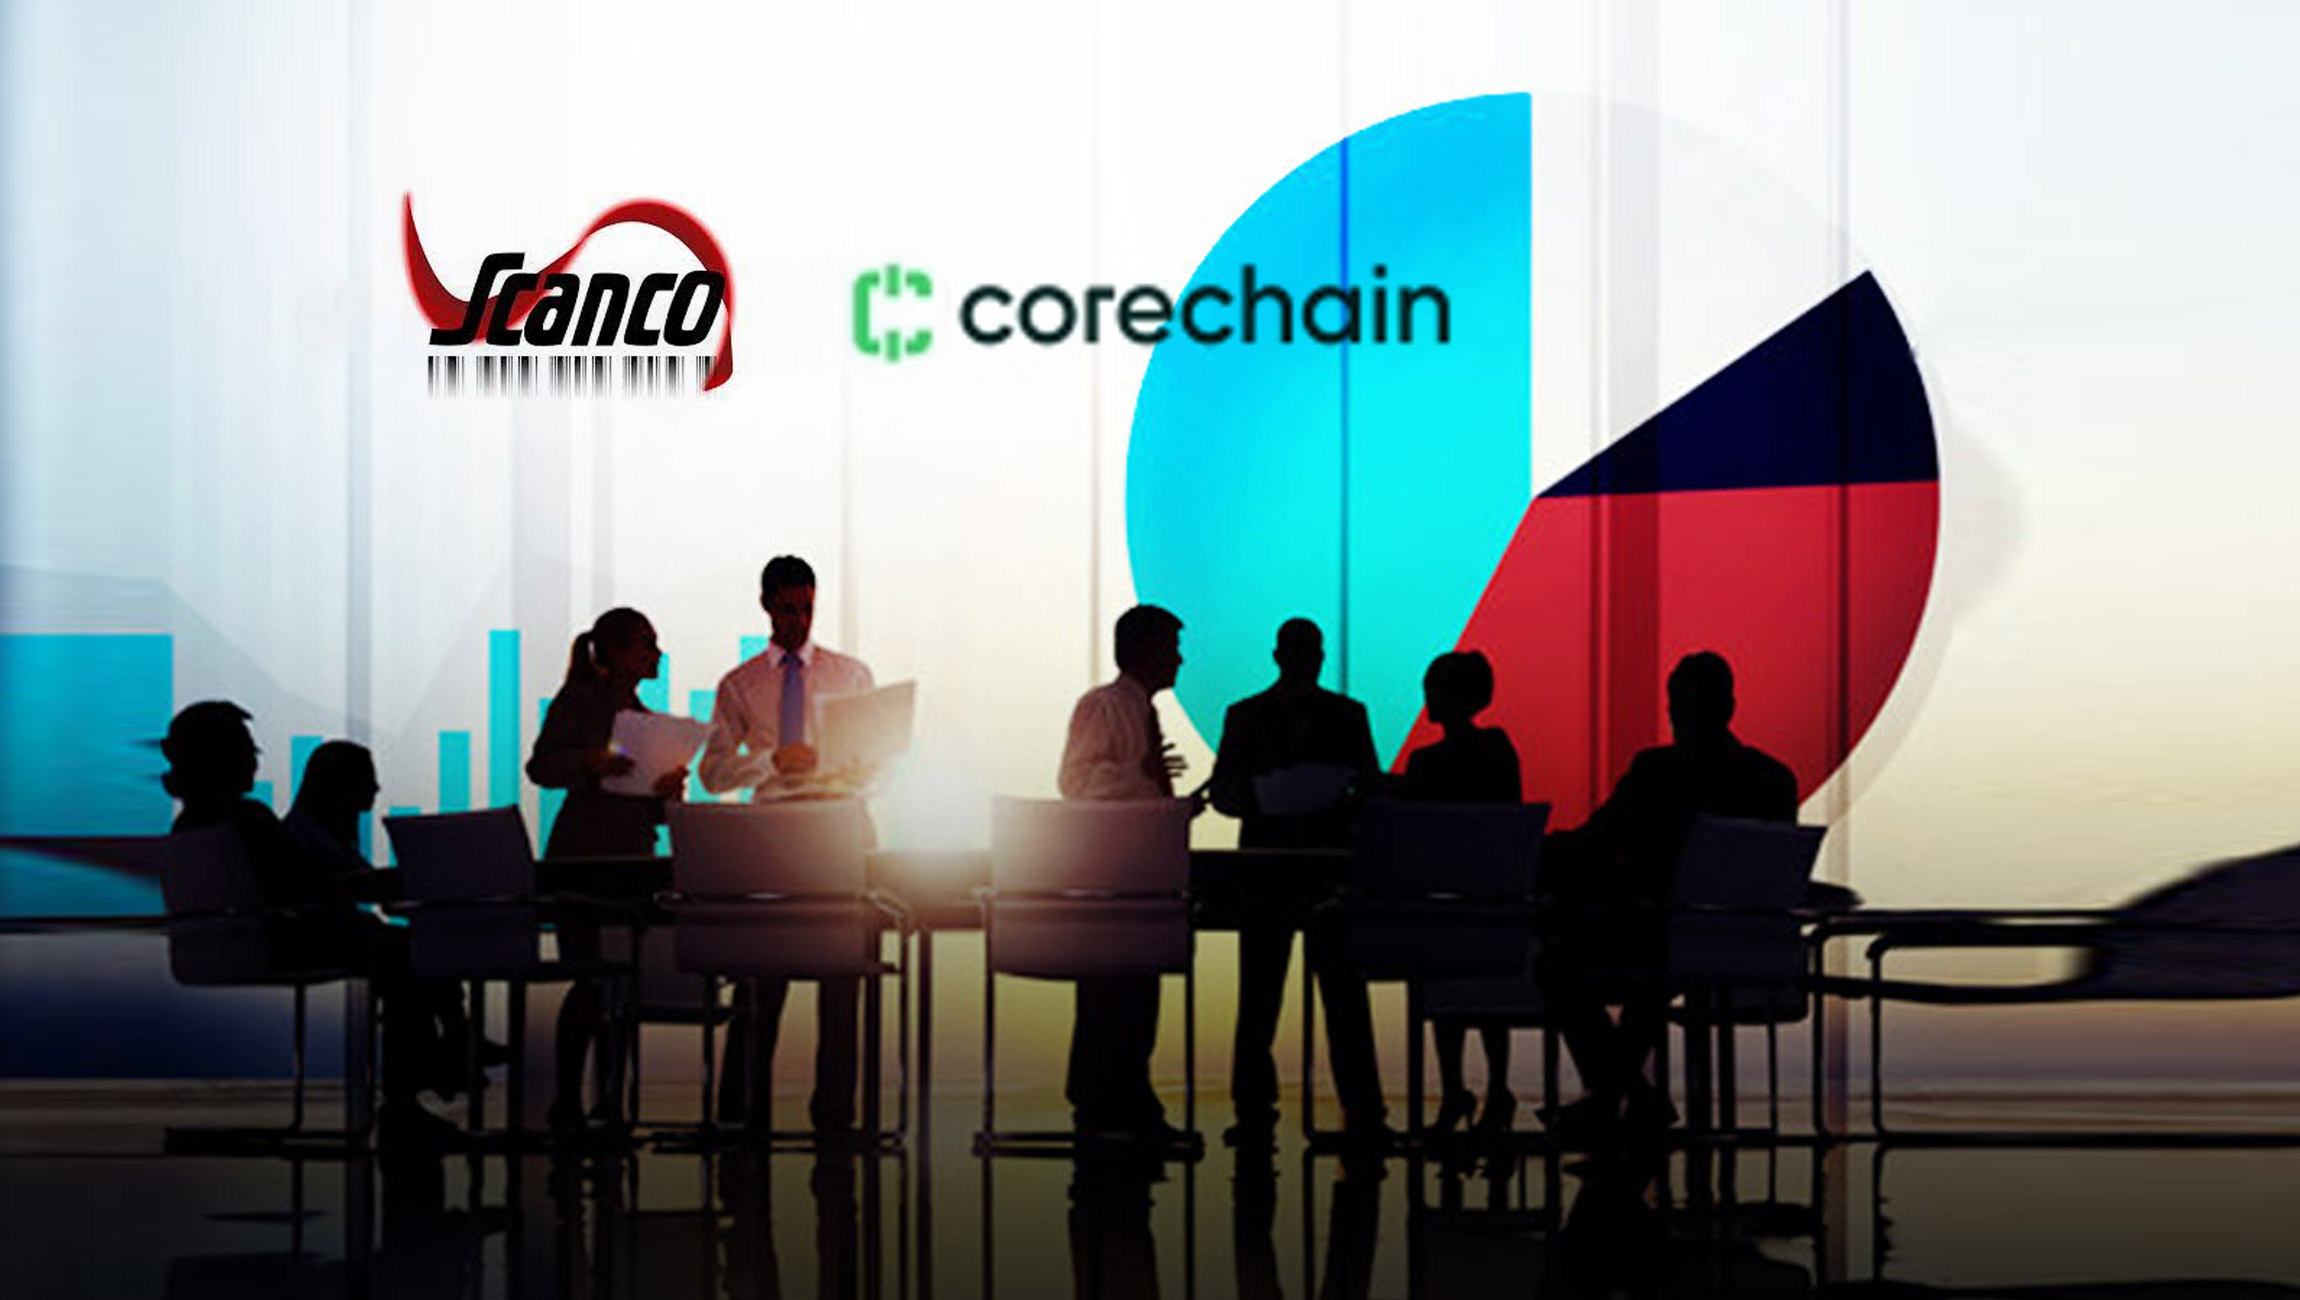 Scanco-and-CoreChain-Announce-Integrated-B2B-Payments-and-Supply-Chain-Finance-Solution